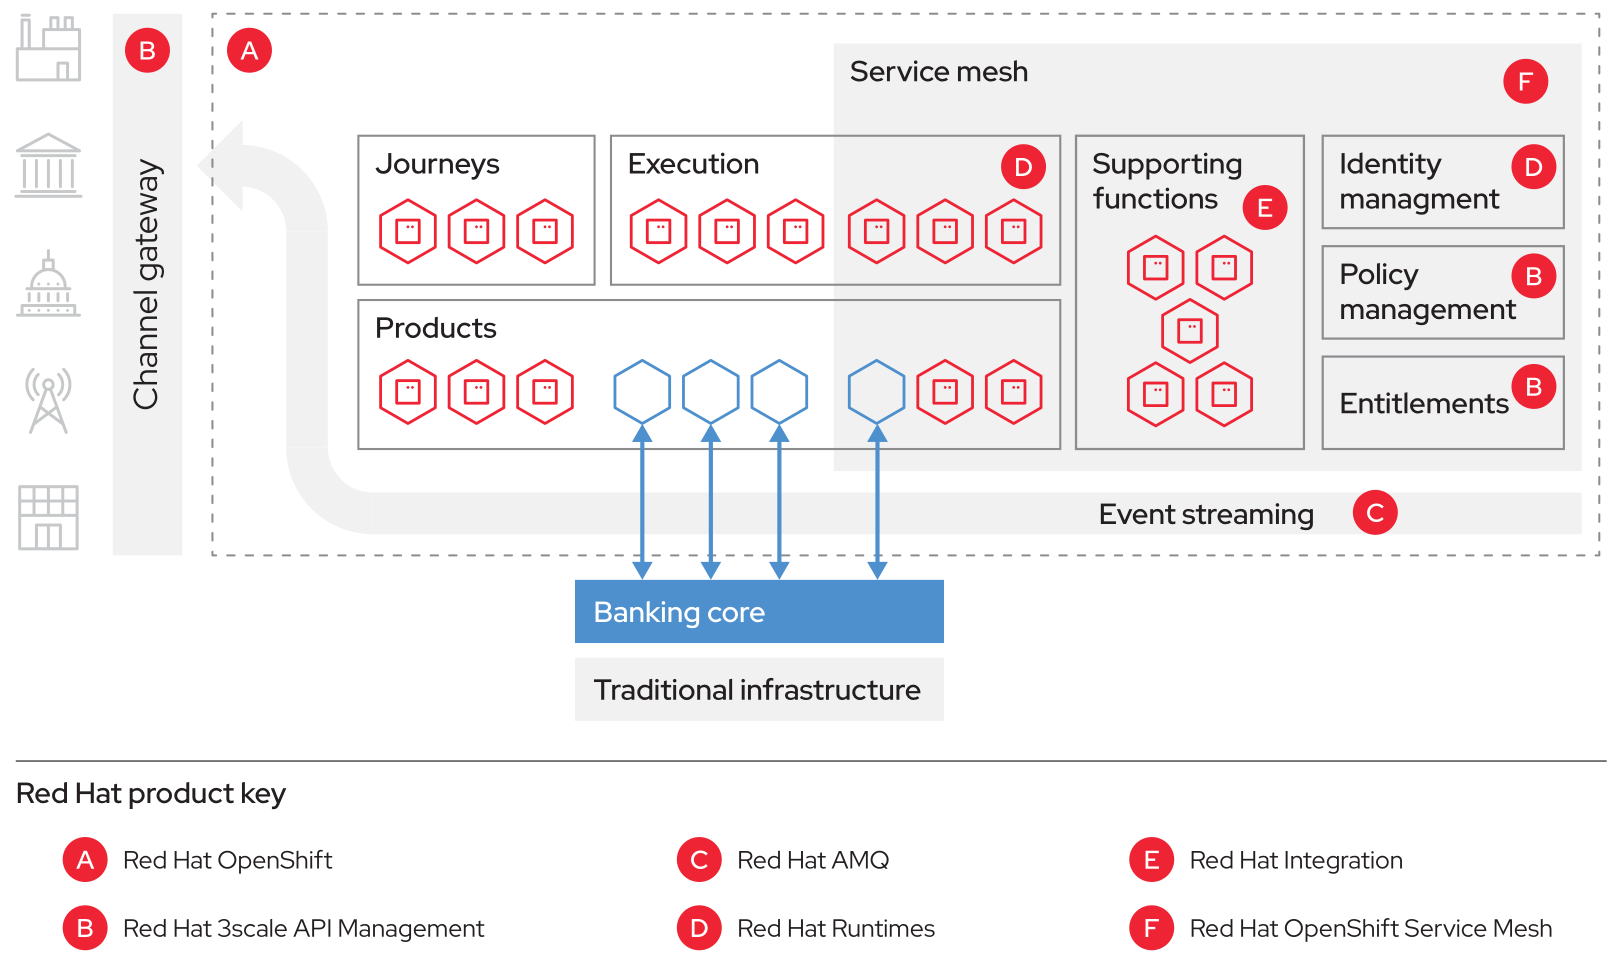 Figure 1. The extend modernization approach adds new interface layers to existing core banking services.